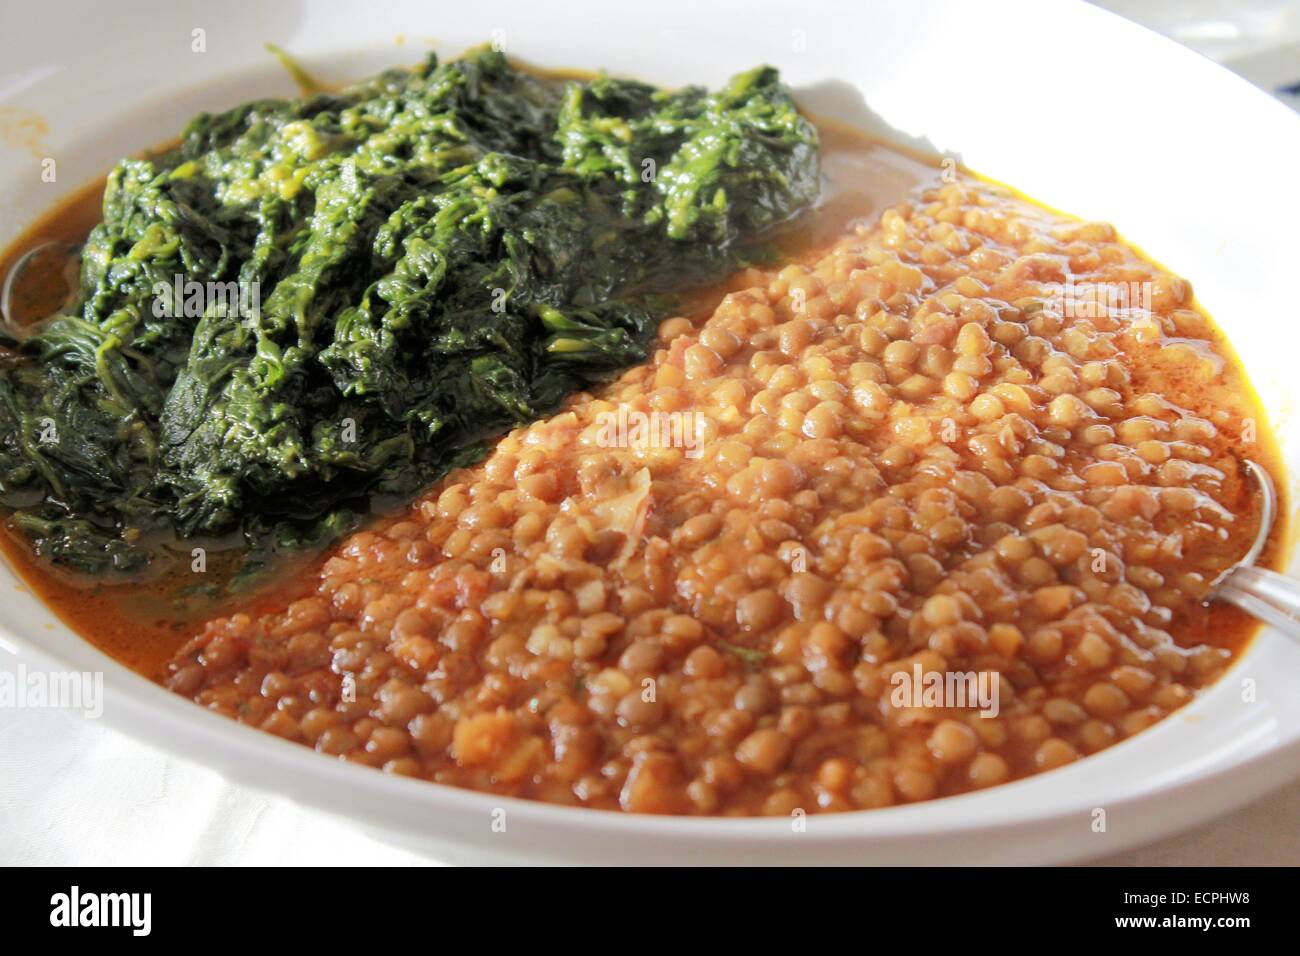 dish with lentils and spinach Stock Photo